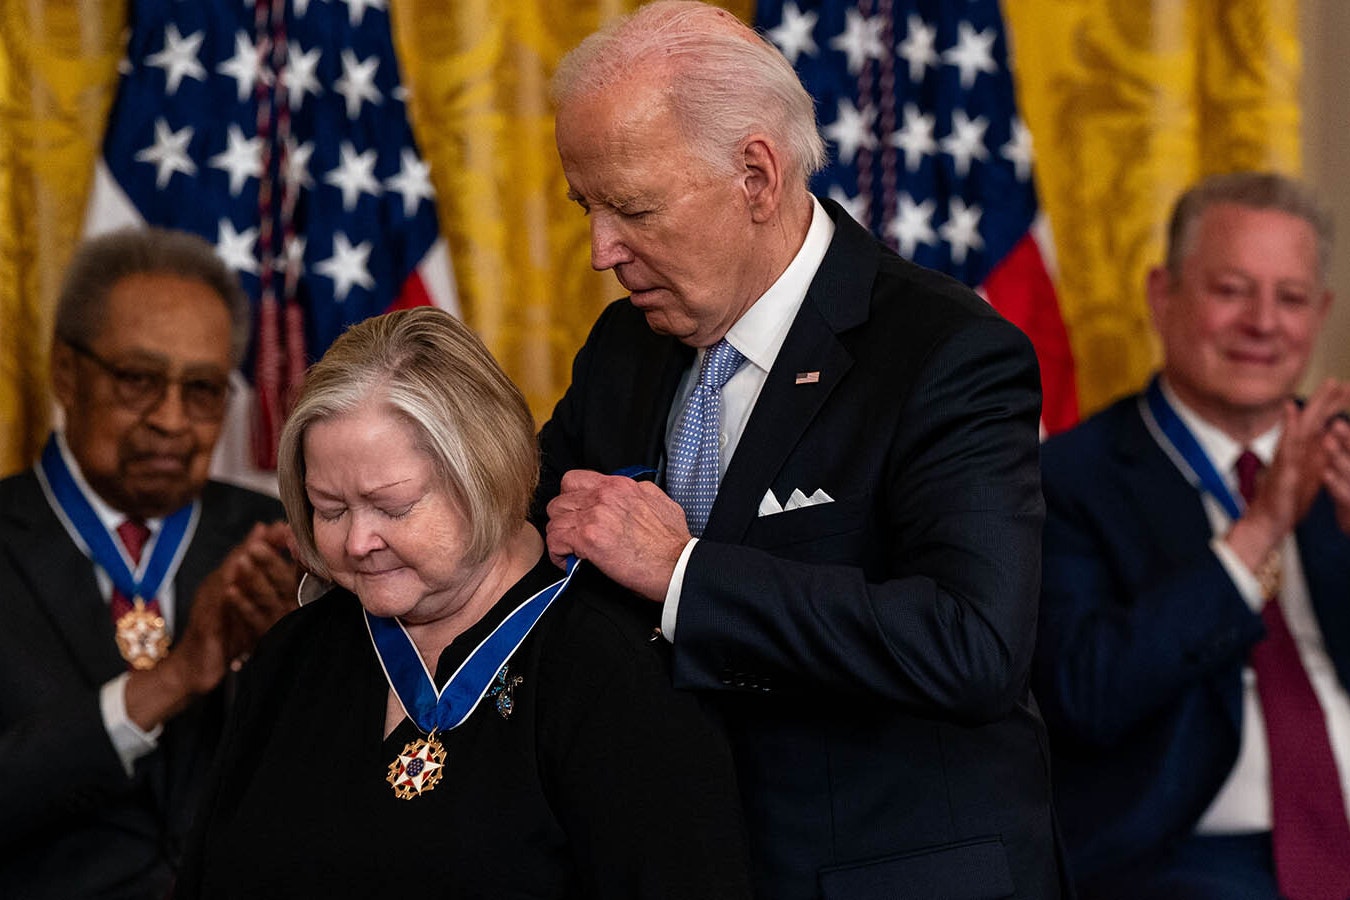 President Joe Biden presents the Presidential Medal of Freedom to Judy Shepard, mother of the late Matthew Shepard and founder of the foundation named in his honor, during a ceremony in the East Room of the White House on May 3, 2024, in Washington, D.C. President Biden awarded the Presidential Medal of Freedom, the Nation's highest civilian honor, to 19 individuals including political leaders, civil rights icons and other influential cultural icons.